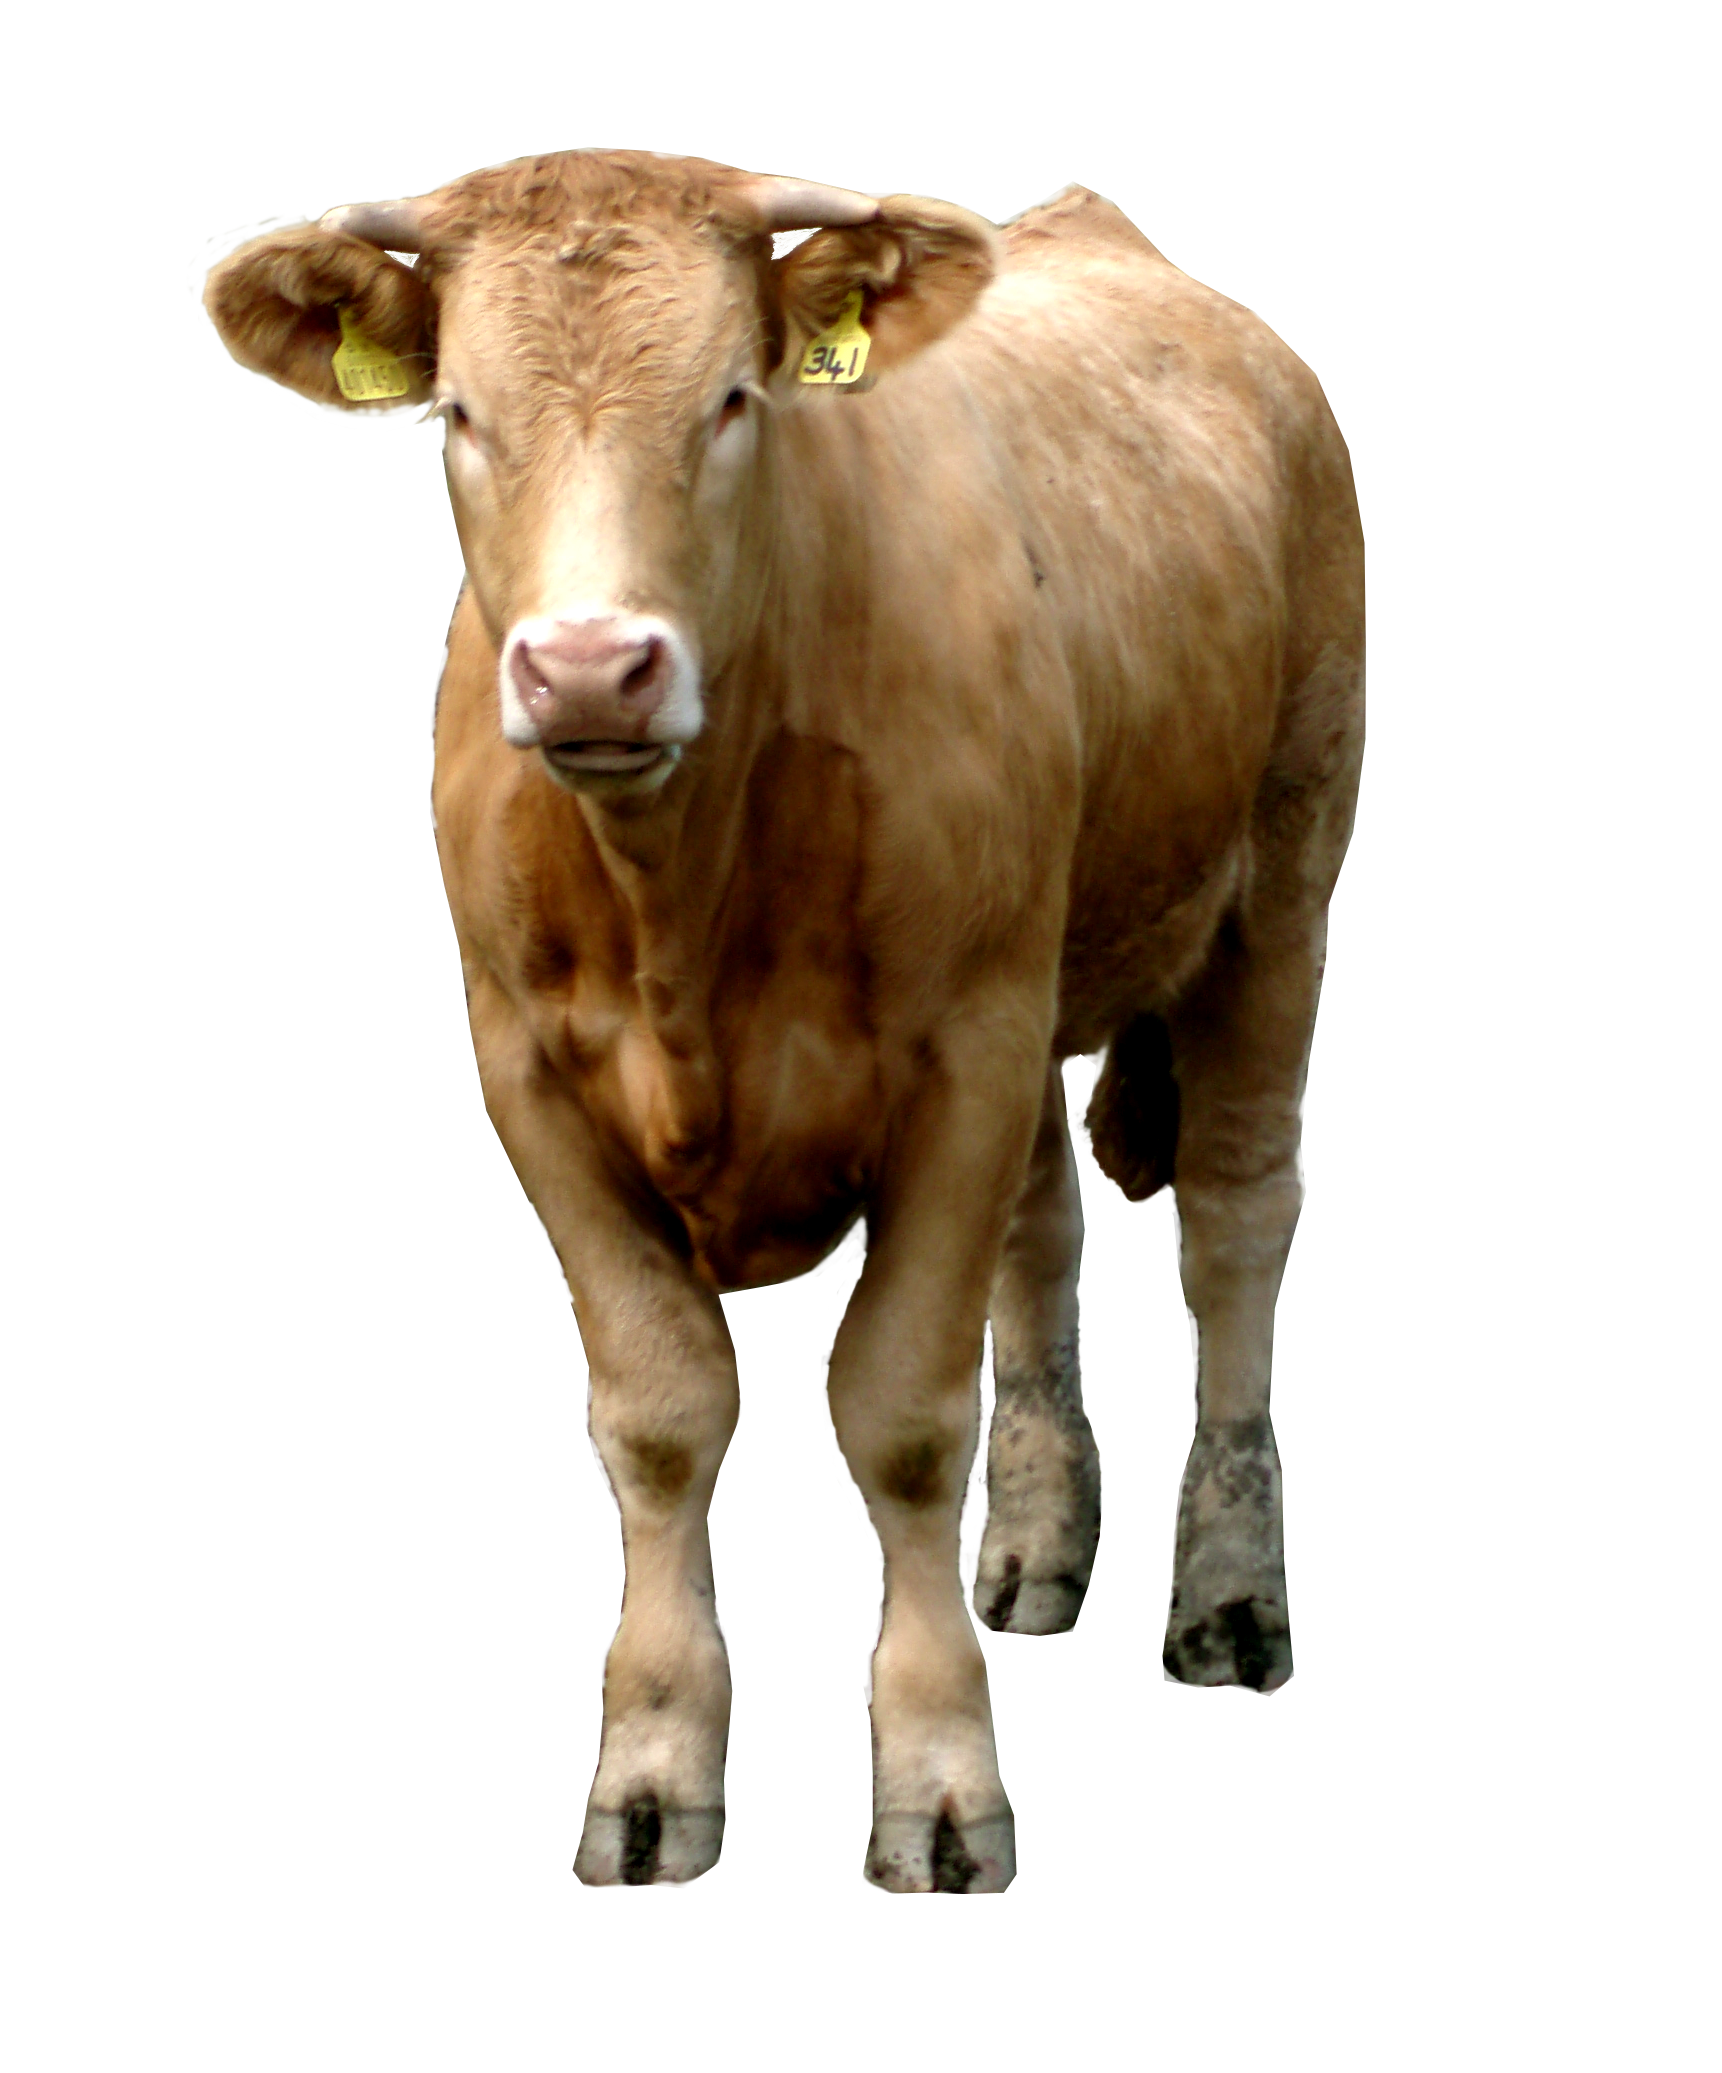 brown Cow PNG image